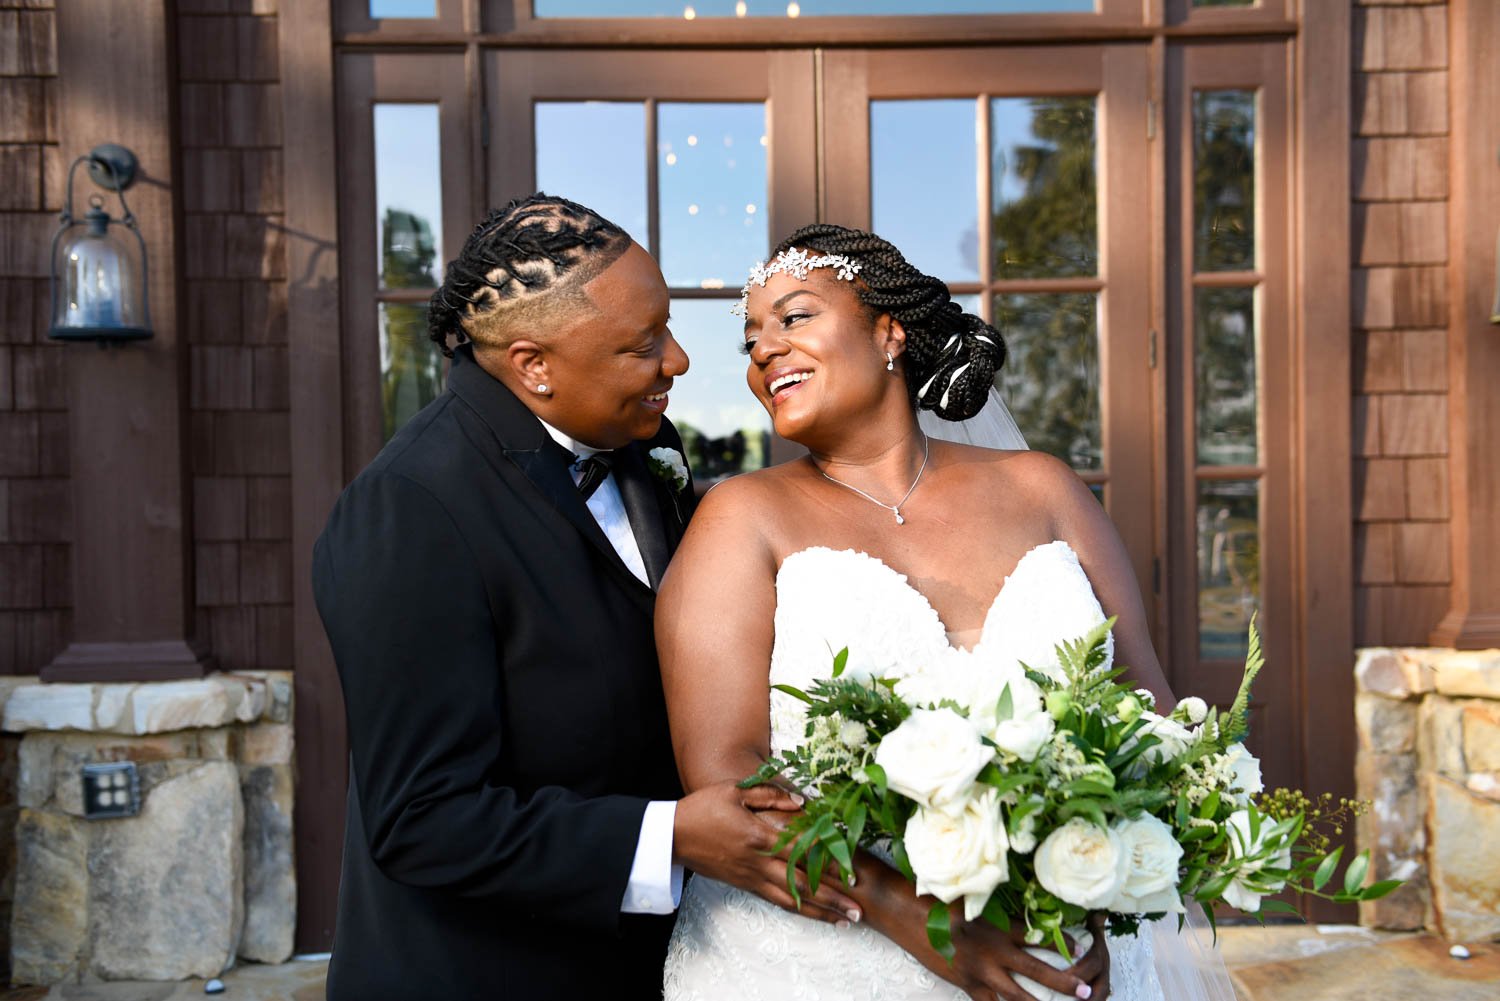 Brides celebrate their love with a kiss during wedding day portraits with B. Rich Photography